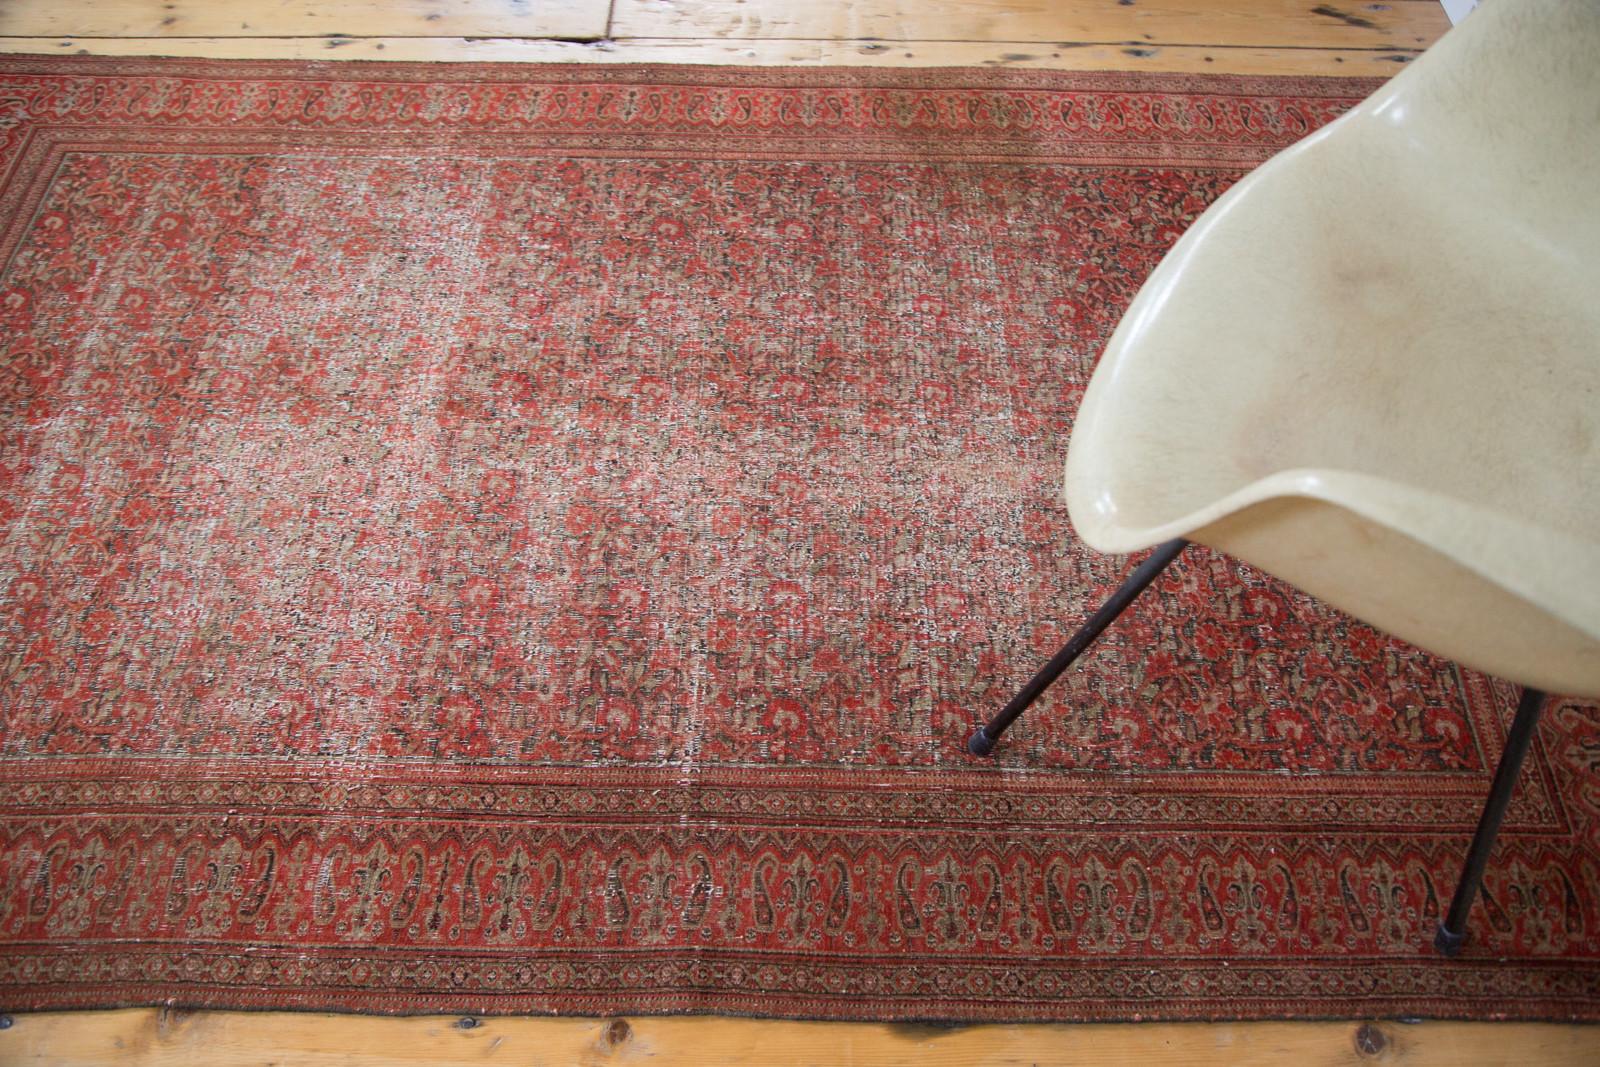 :: Gorgeous perfectly distressed antique Doroksh Persian rug ca. 1910. Allover vine and leaf motif similar in character to arts and crafts style patterns. Lovely charcoal bronze with subdued smokey red and ivory throughout. Fully secured sides and